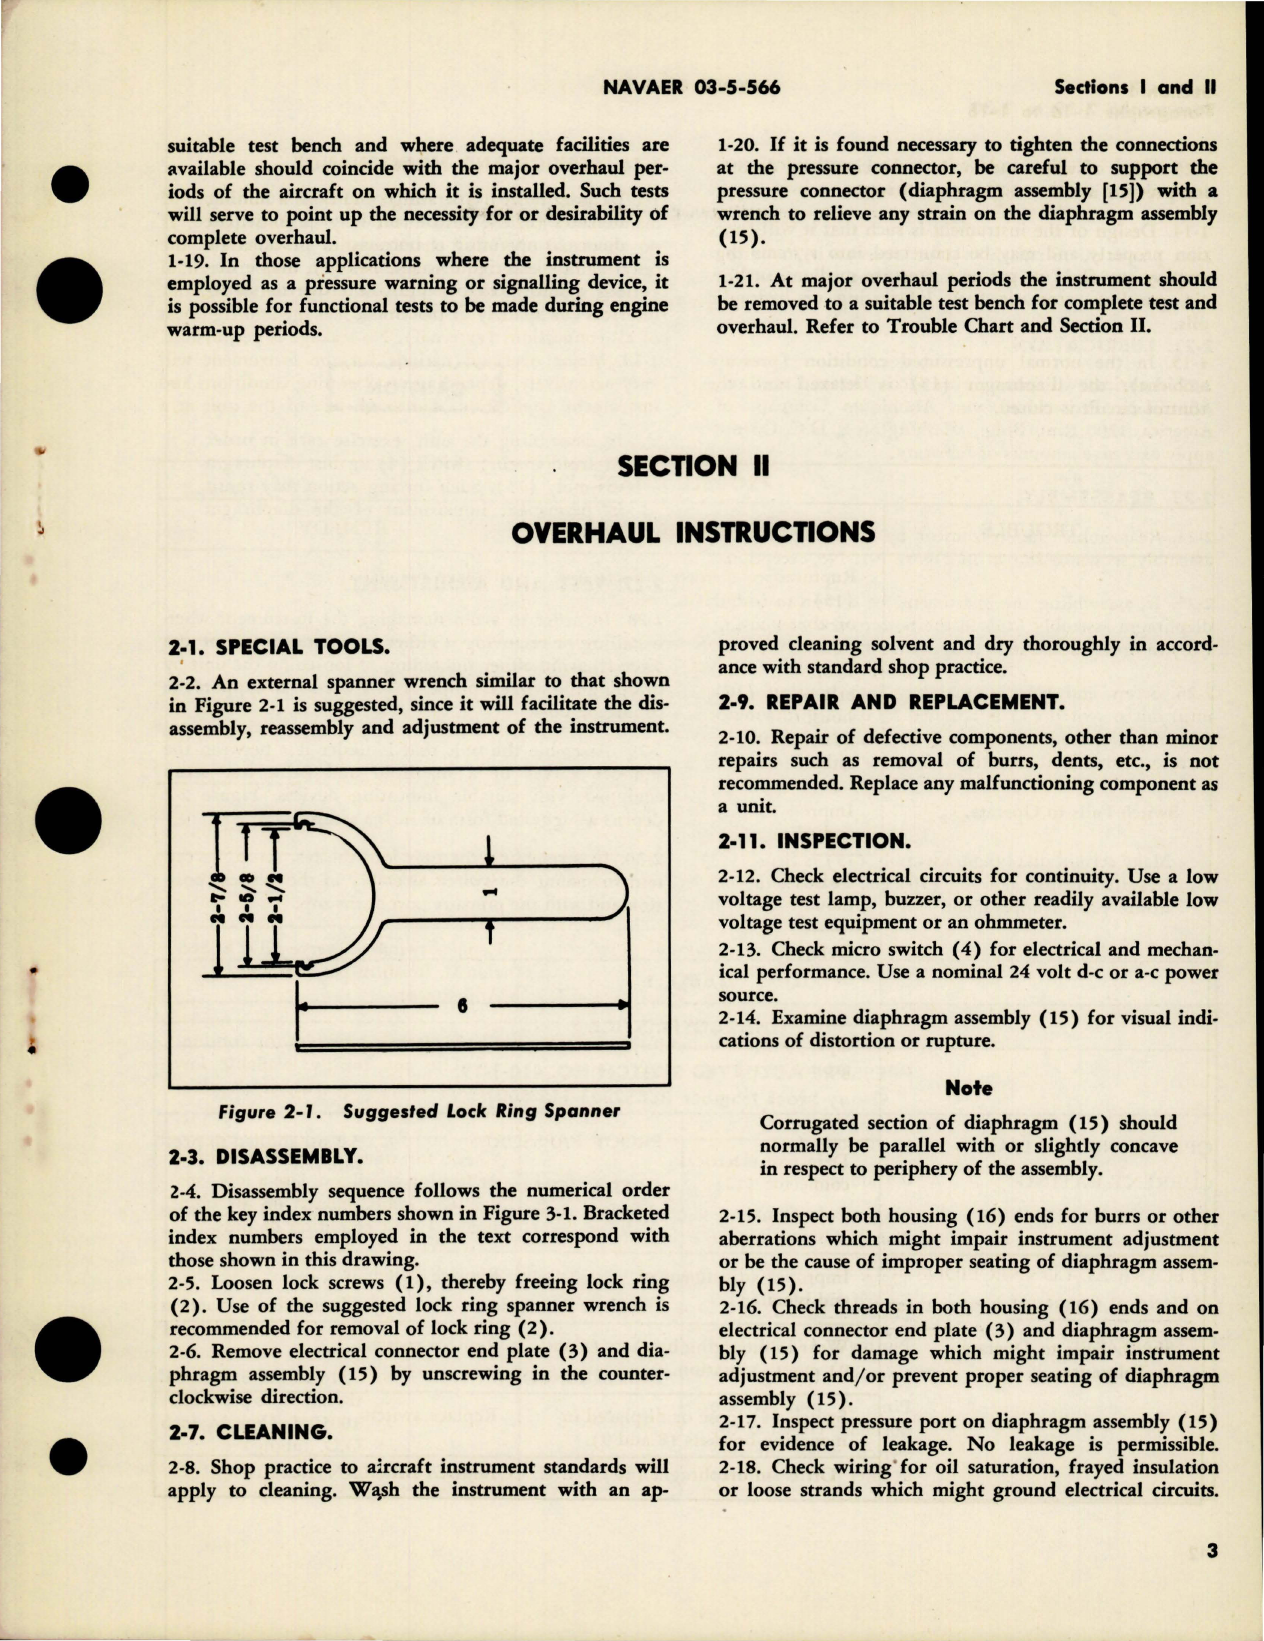 Sample page 5 from AirCorps Library document: Operation, Service and Overhaul Instructions with Parts for Pressure Actuated Switch - Model 410-1-19 